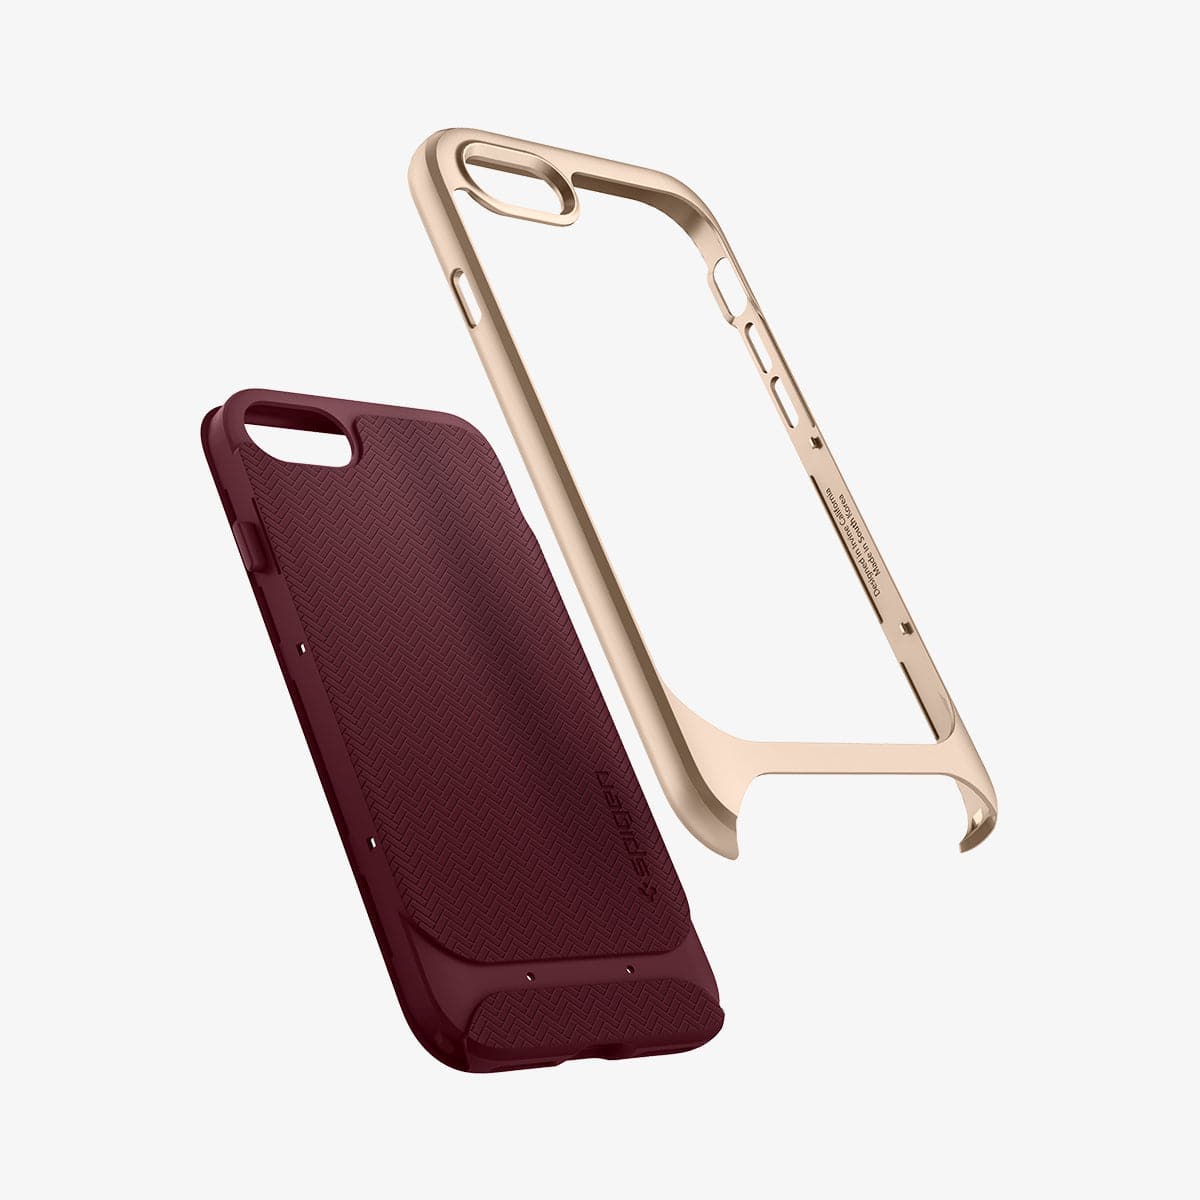 054CS22198 - iPhone 8 Series Neo Hybrid Herringbone Case in Burgundy showing the hard frame hovering above the back of the case